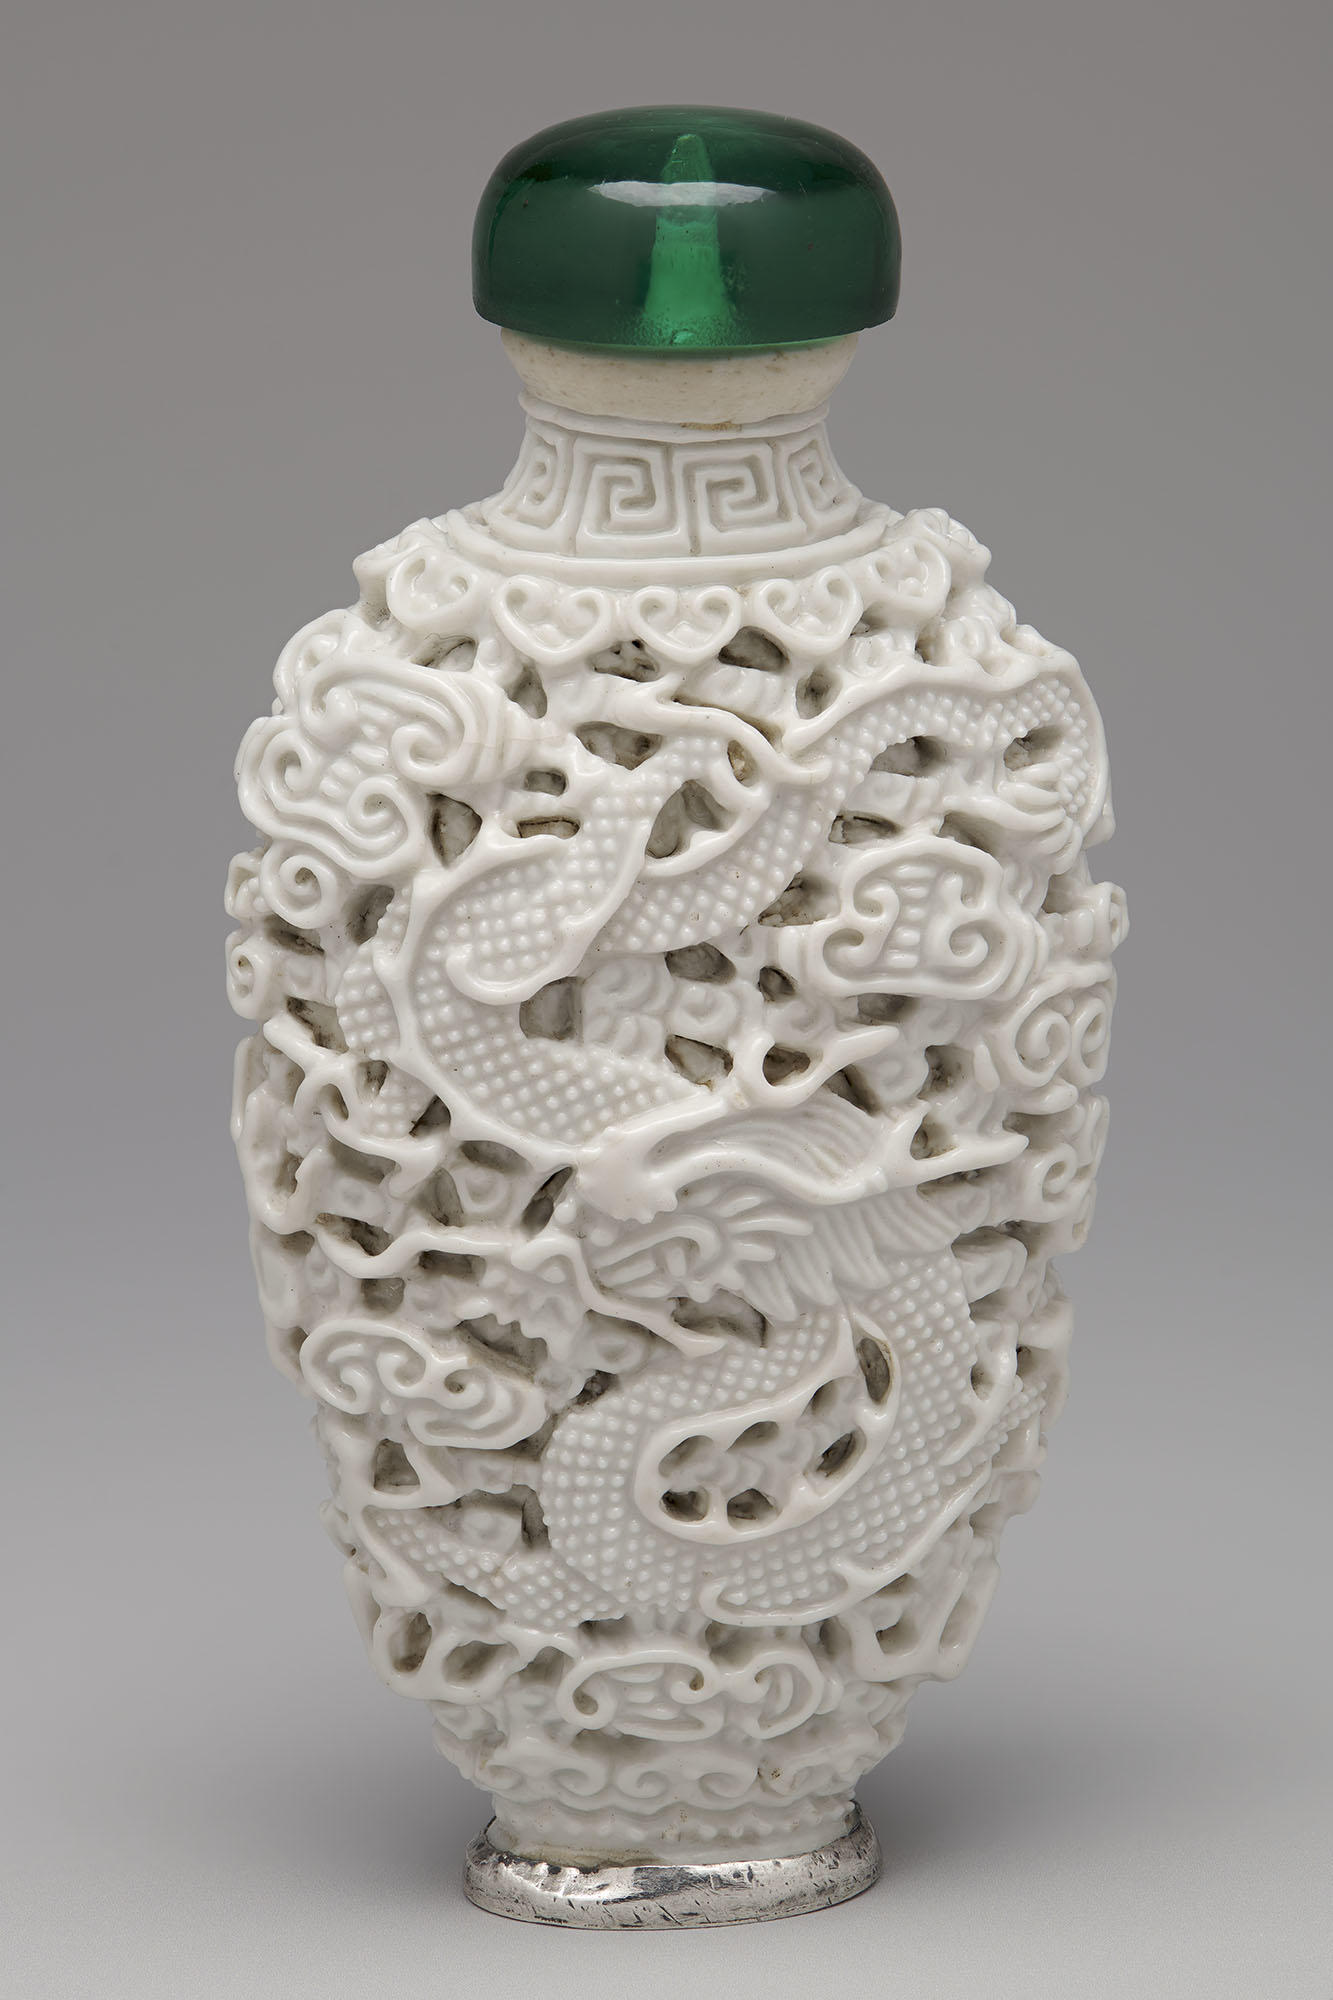 An oval-shaped white snuff bottle with a green stopper and silver rimmed foot. Carved into its surface is a dragon among clouds. 